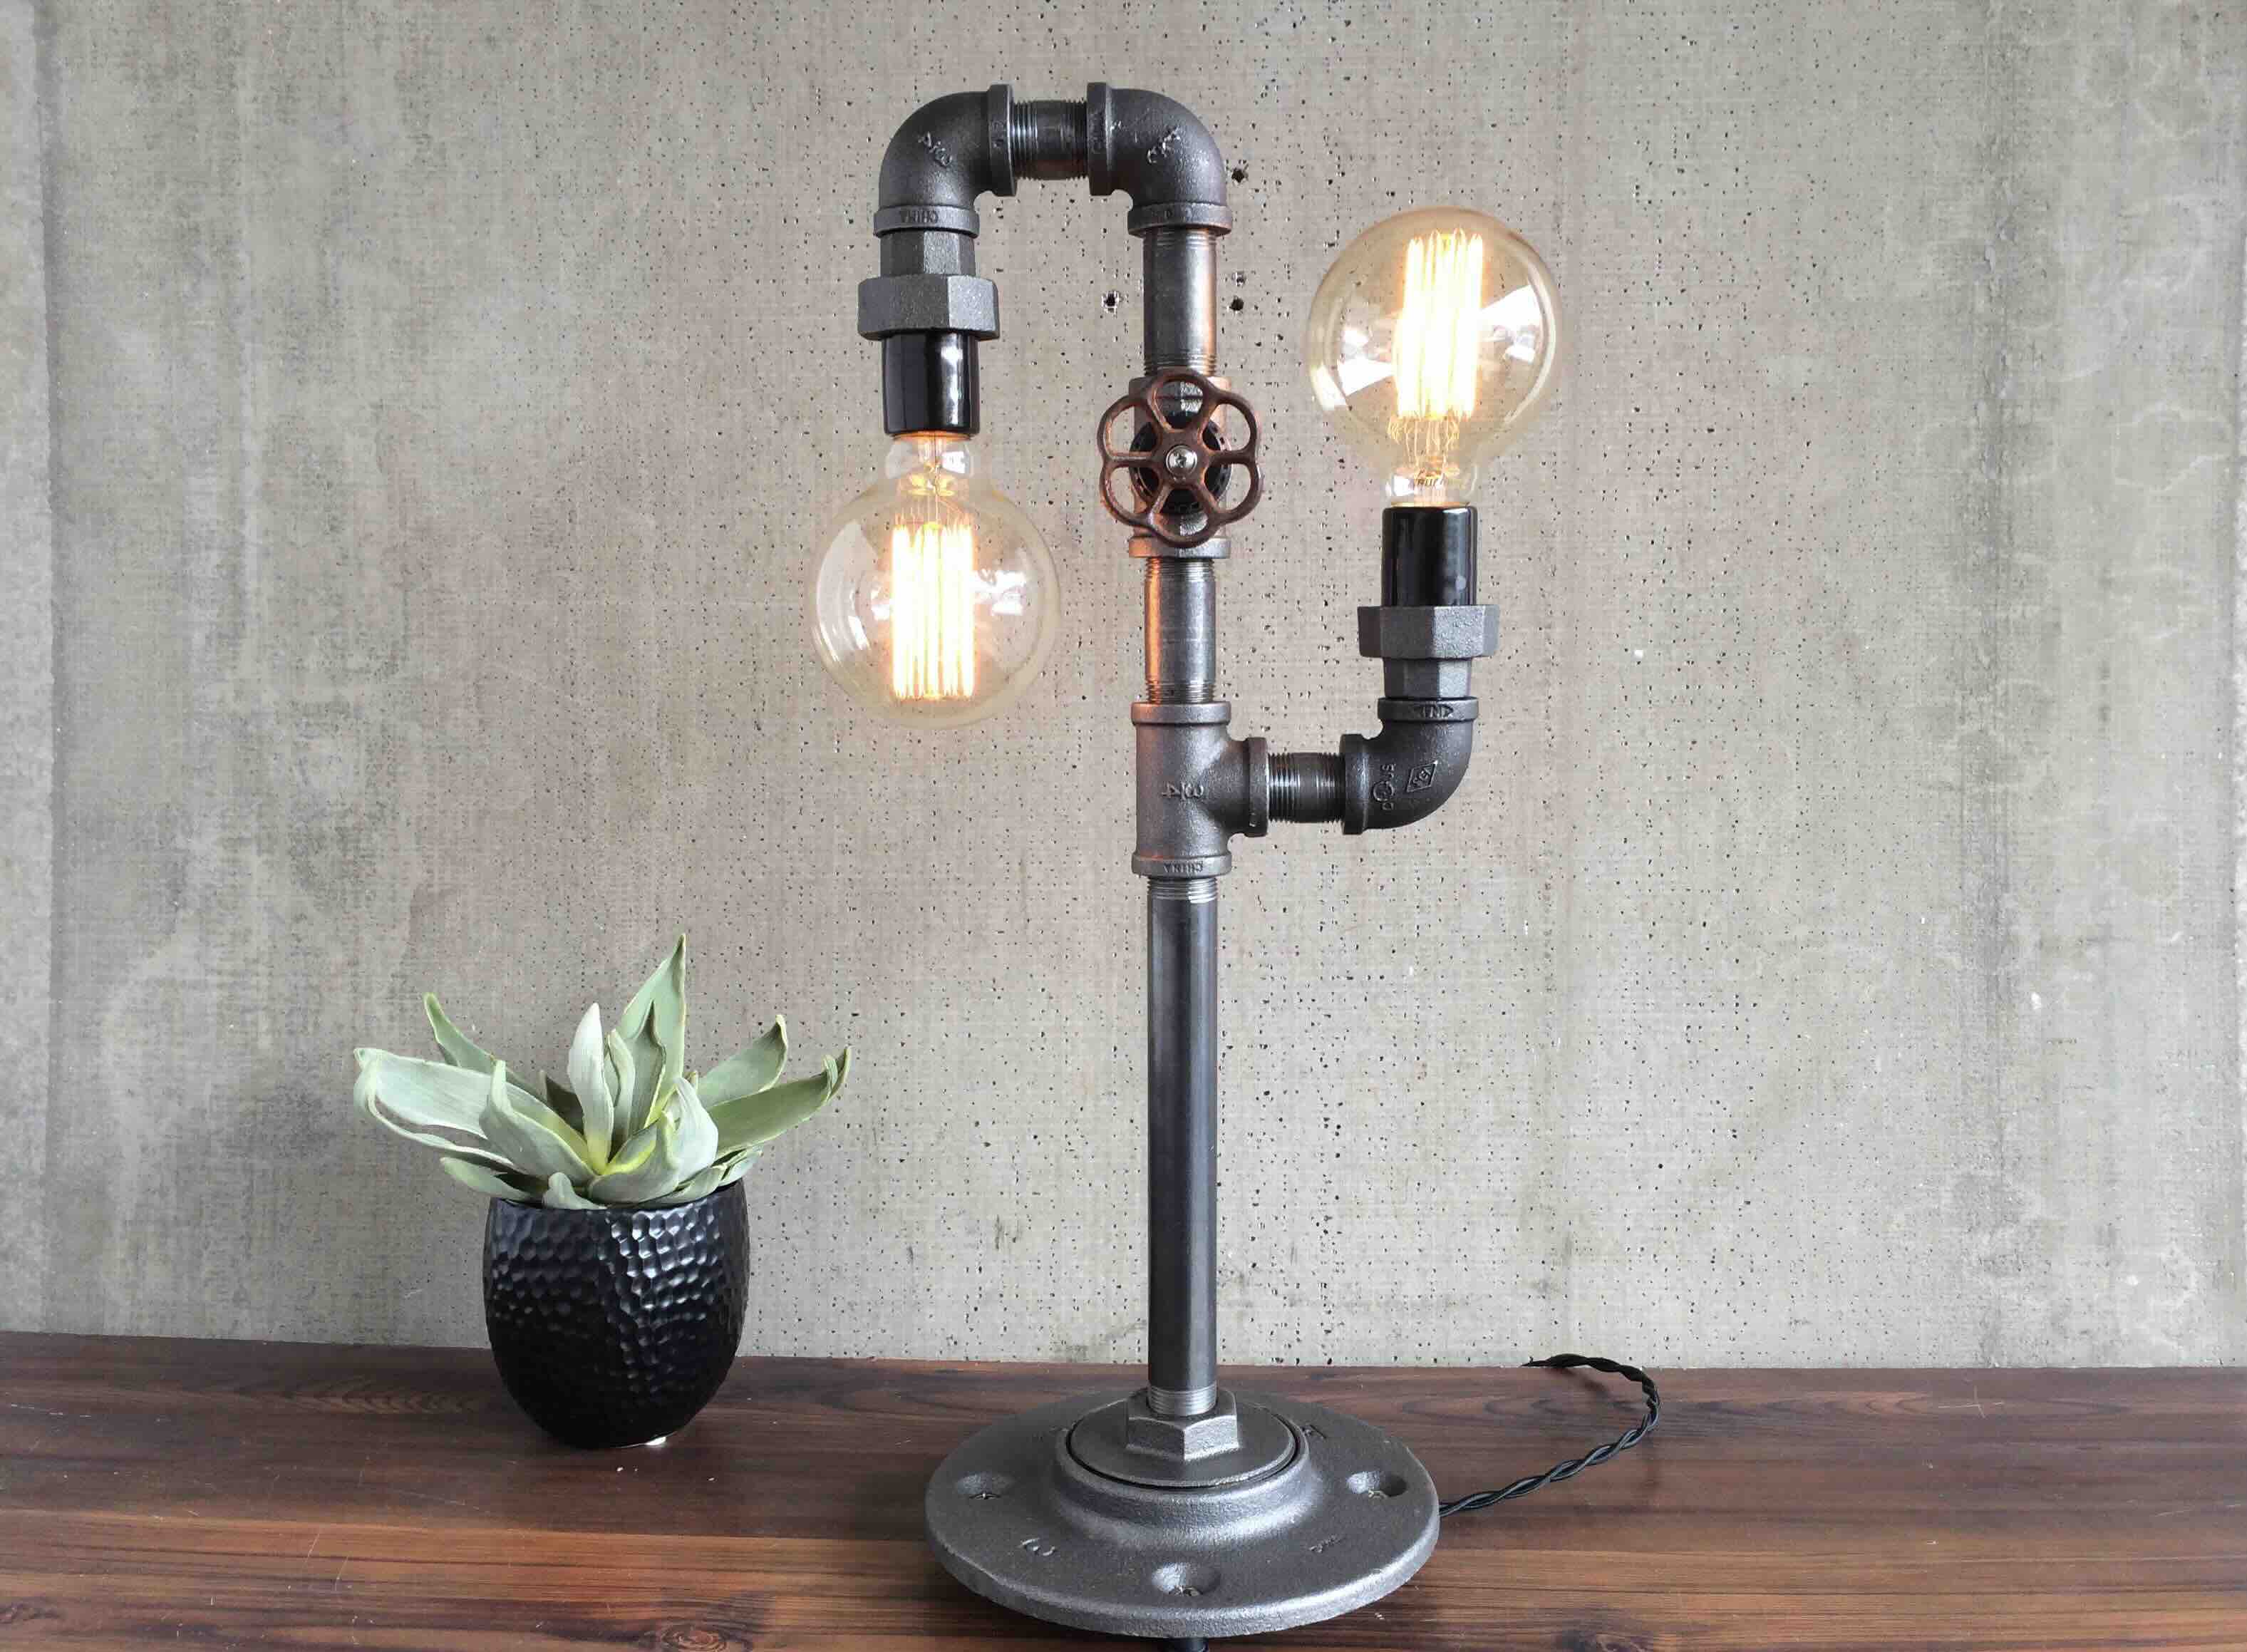 How To Make A Pipe Lamp